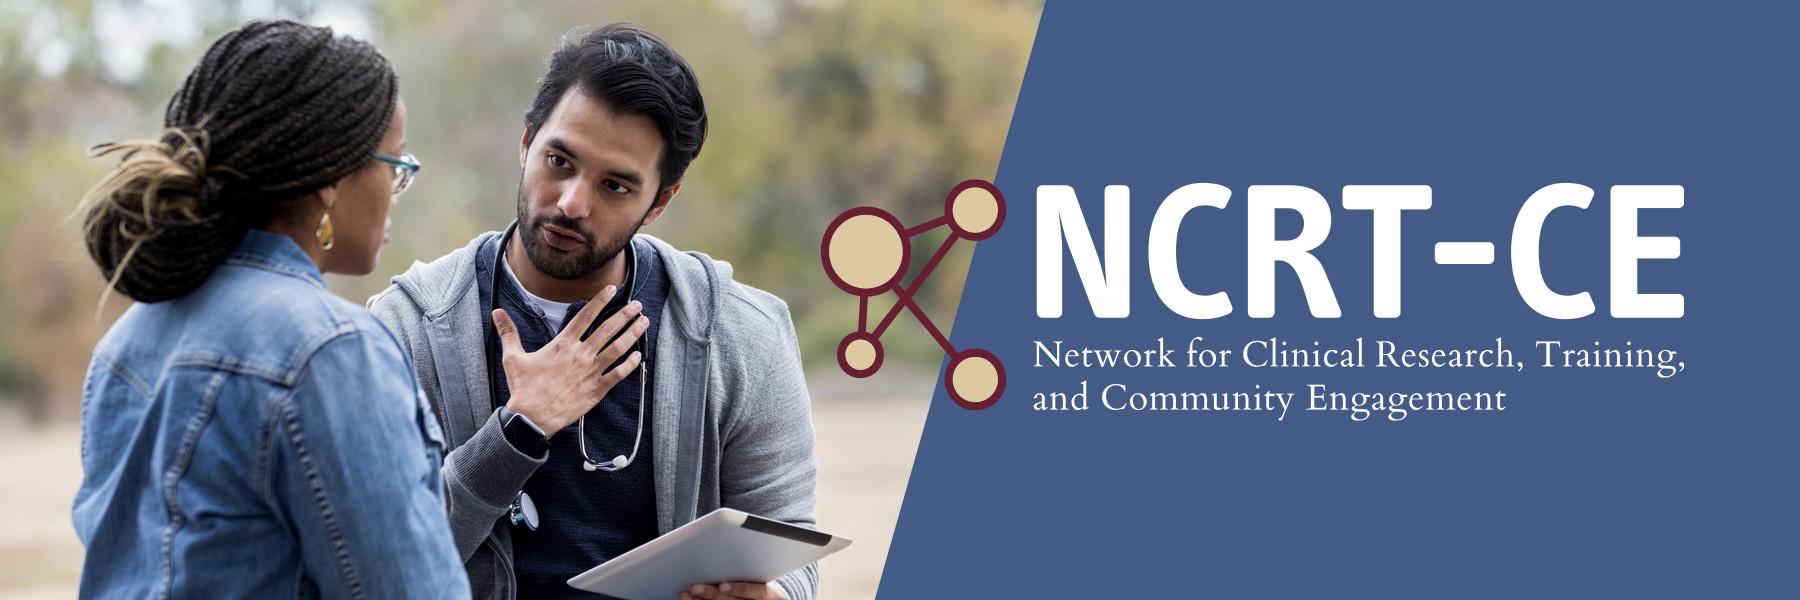 Network for Clinical Research and Training & Community Engagement